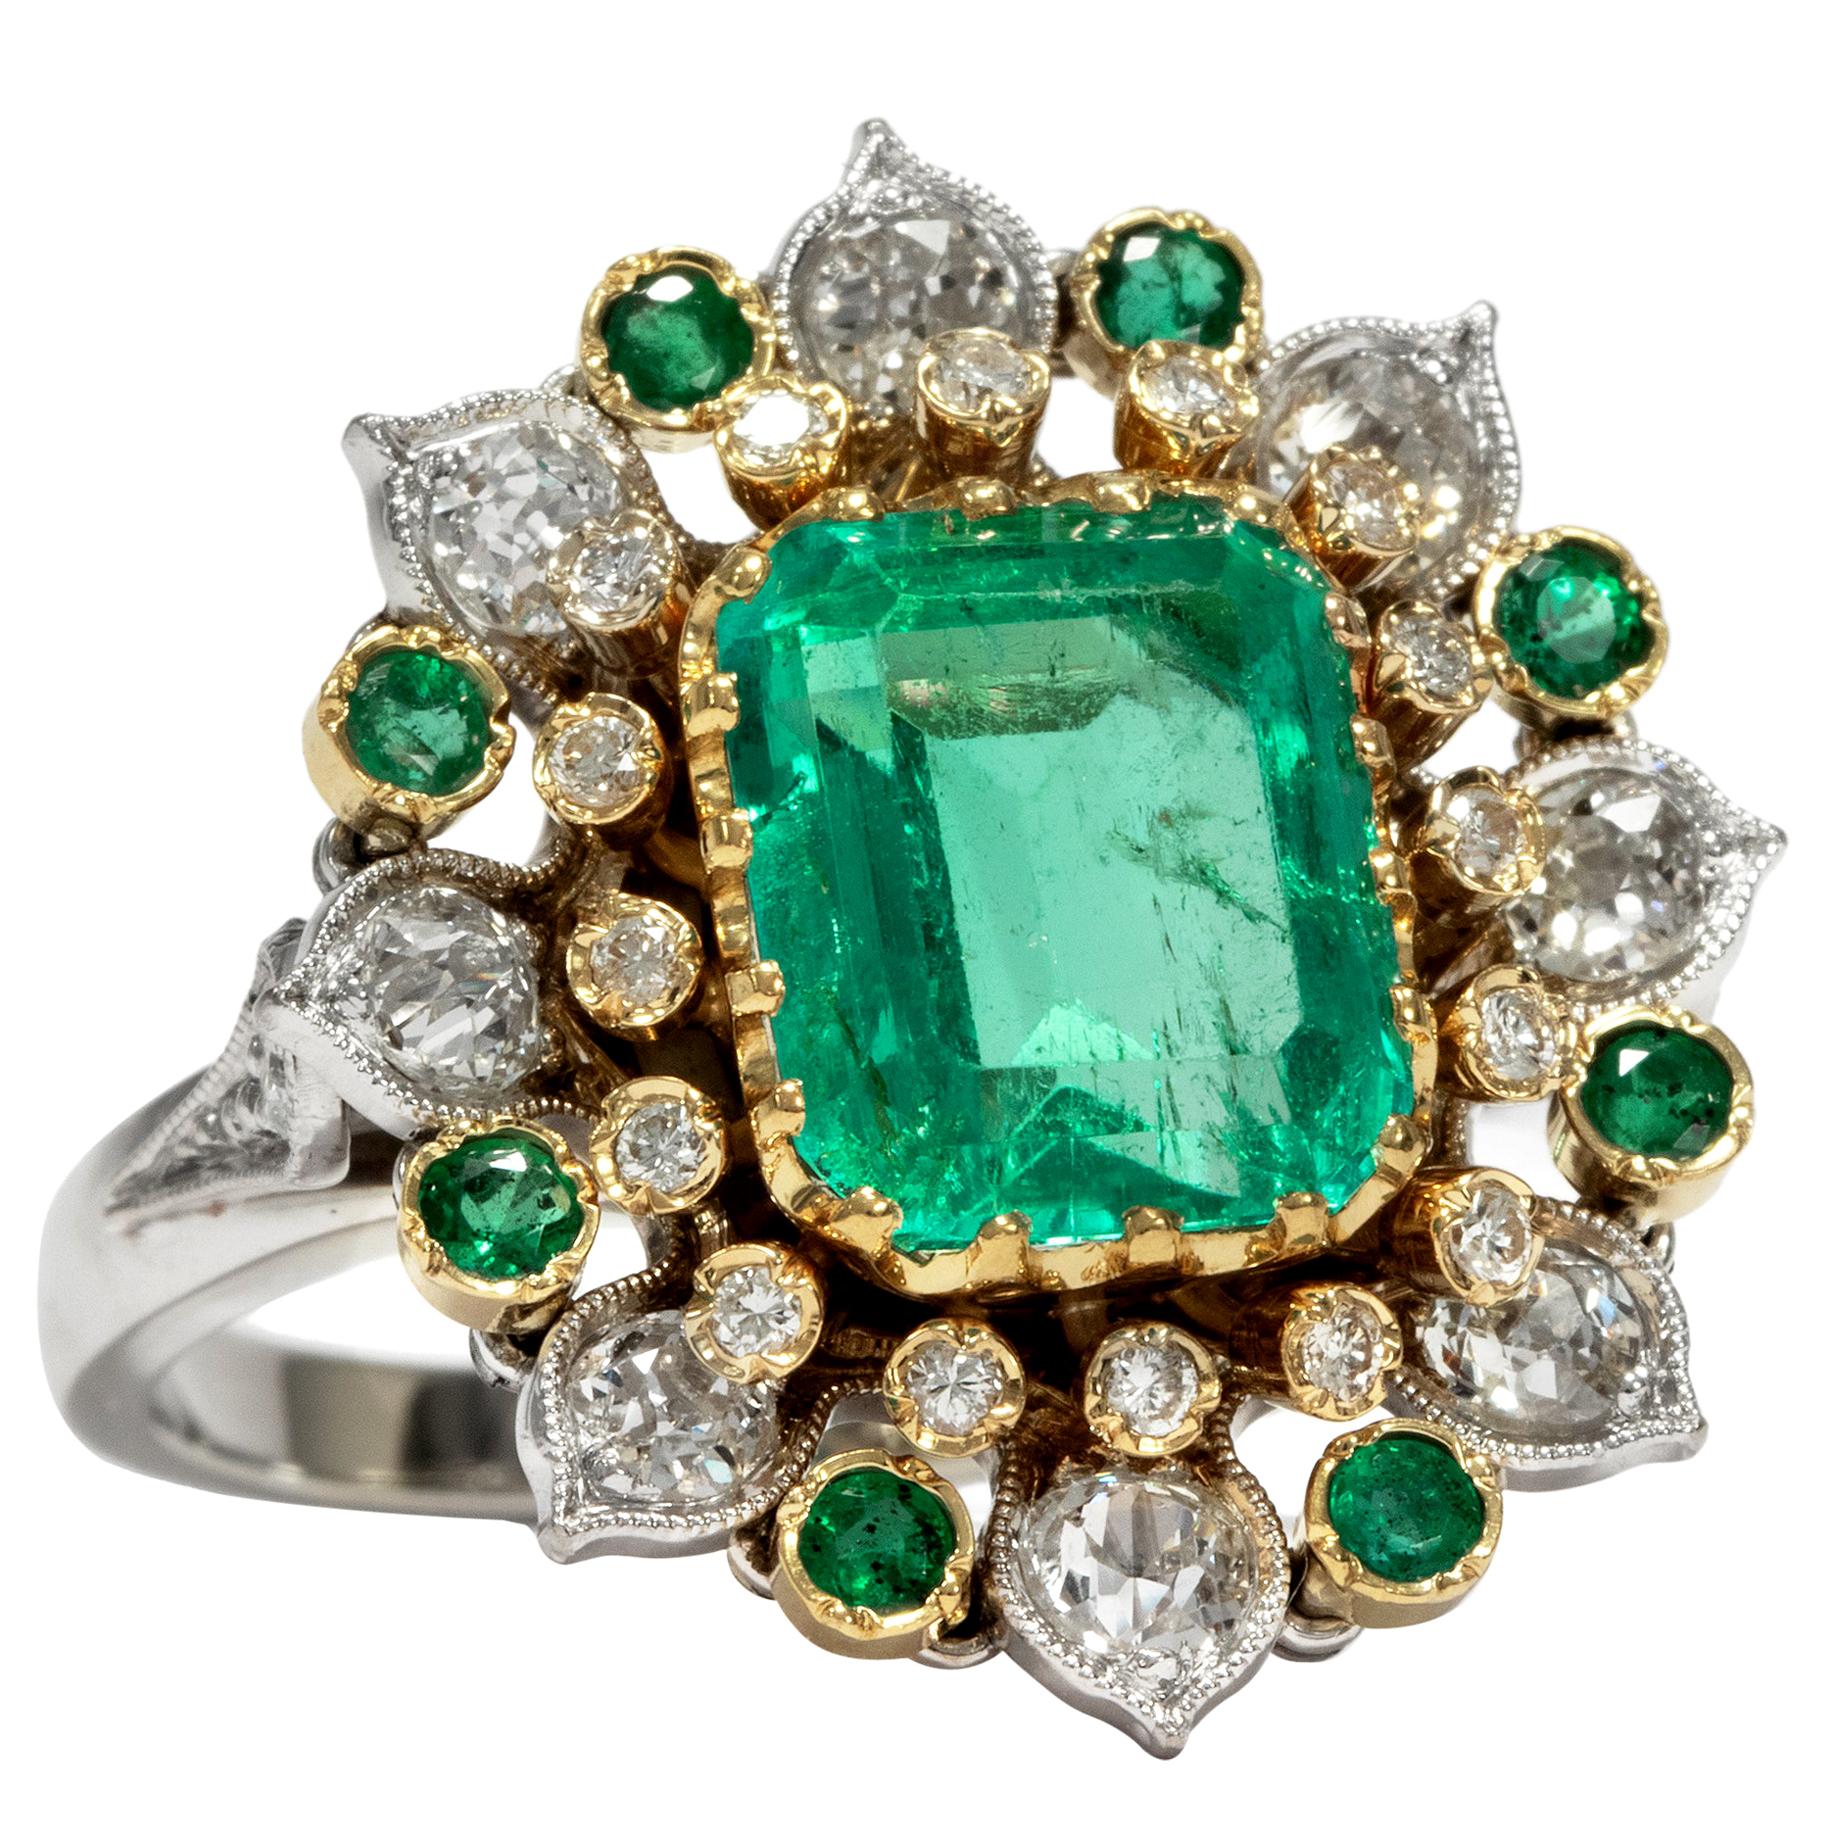 Vintage 1970s Certified 3.9 Carat Emerald Diamond Gold Cluster Cocktail Ring